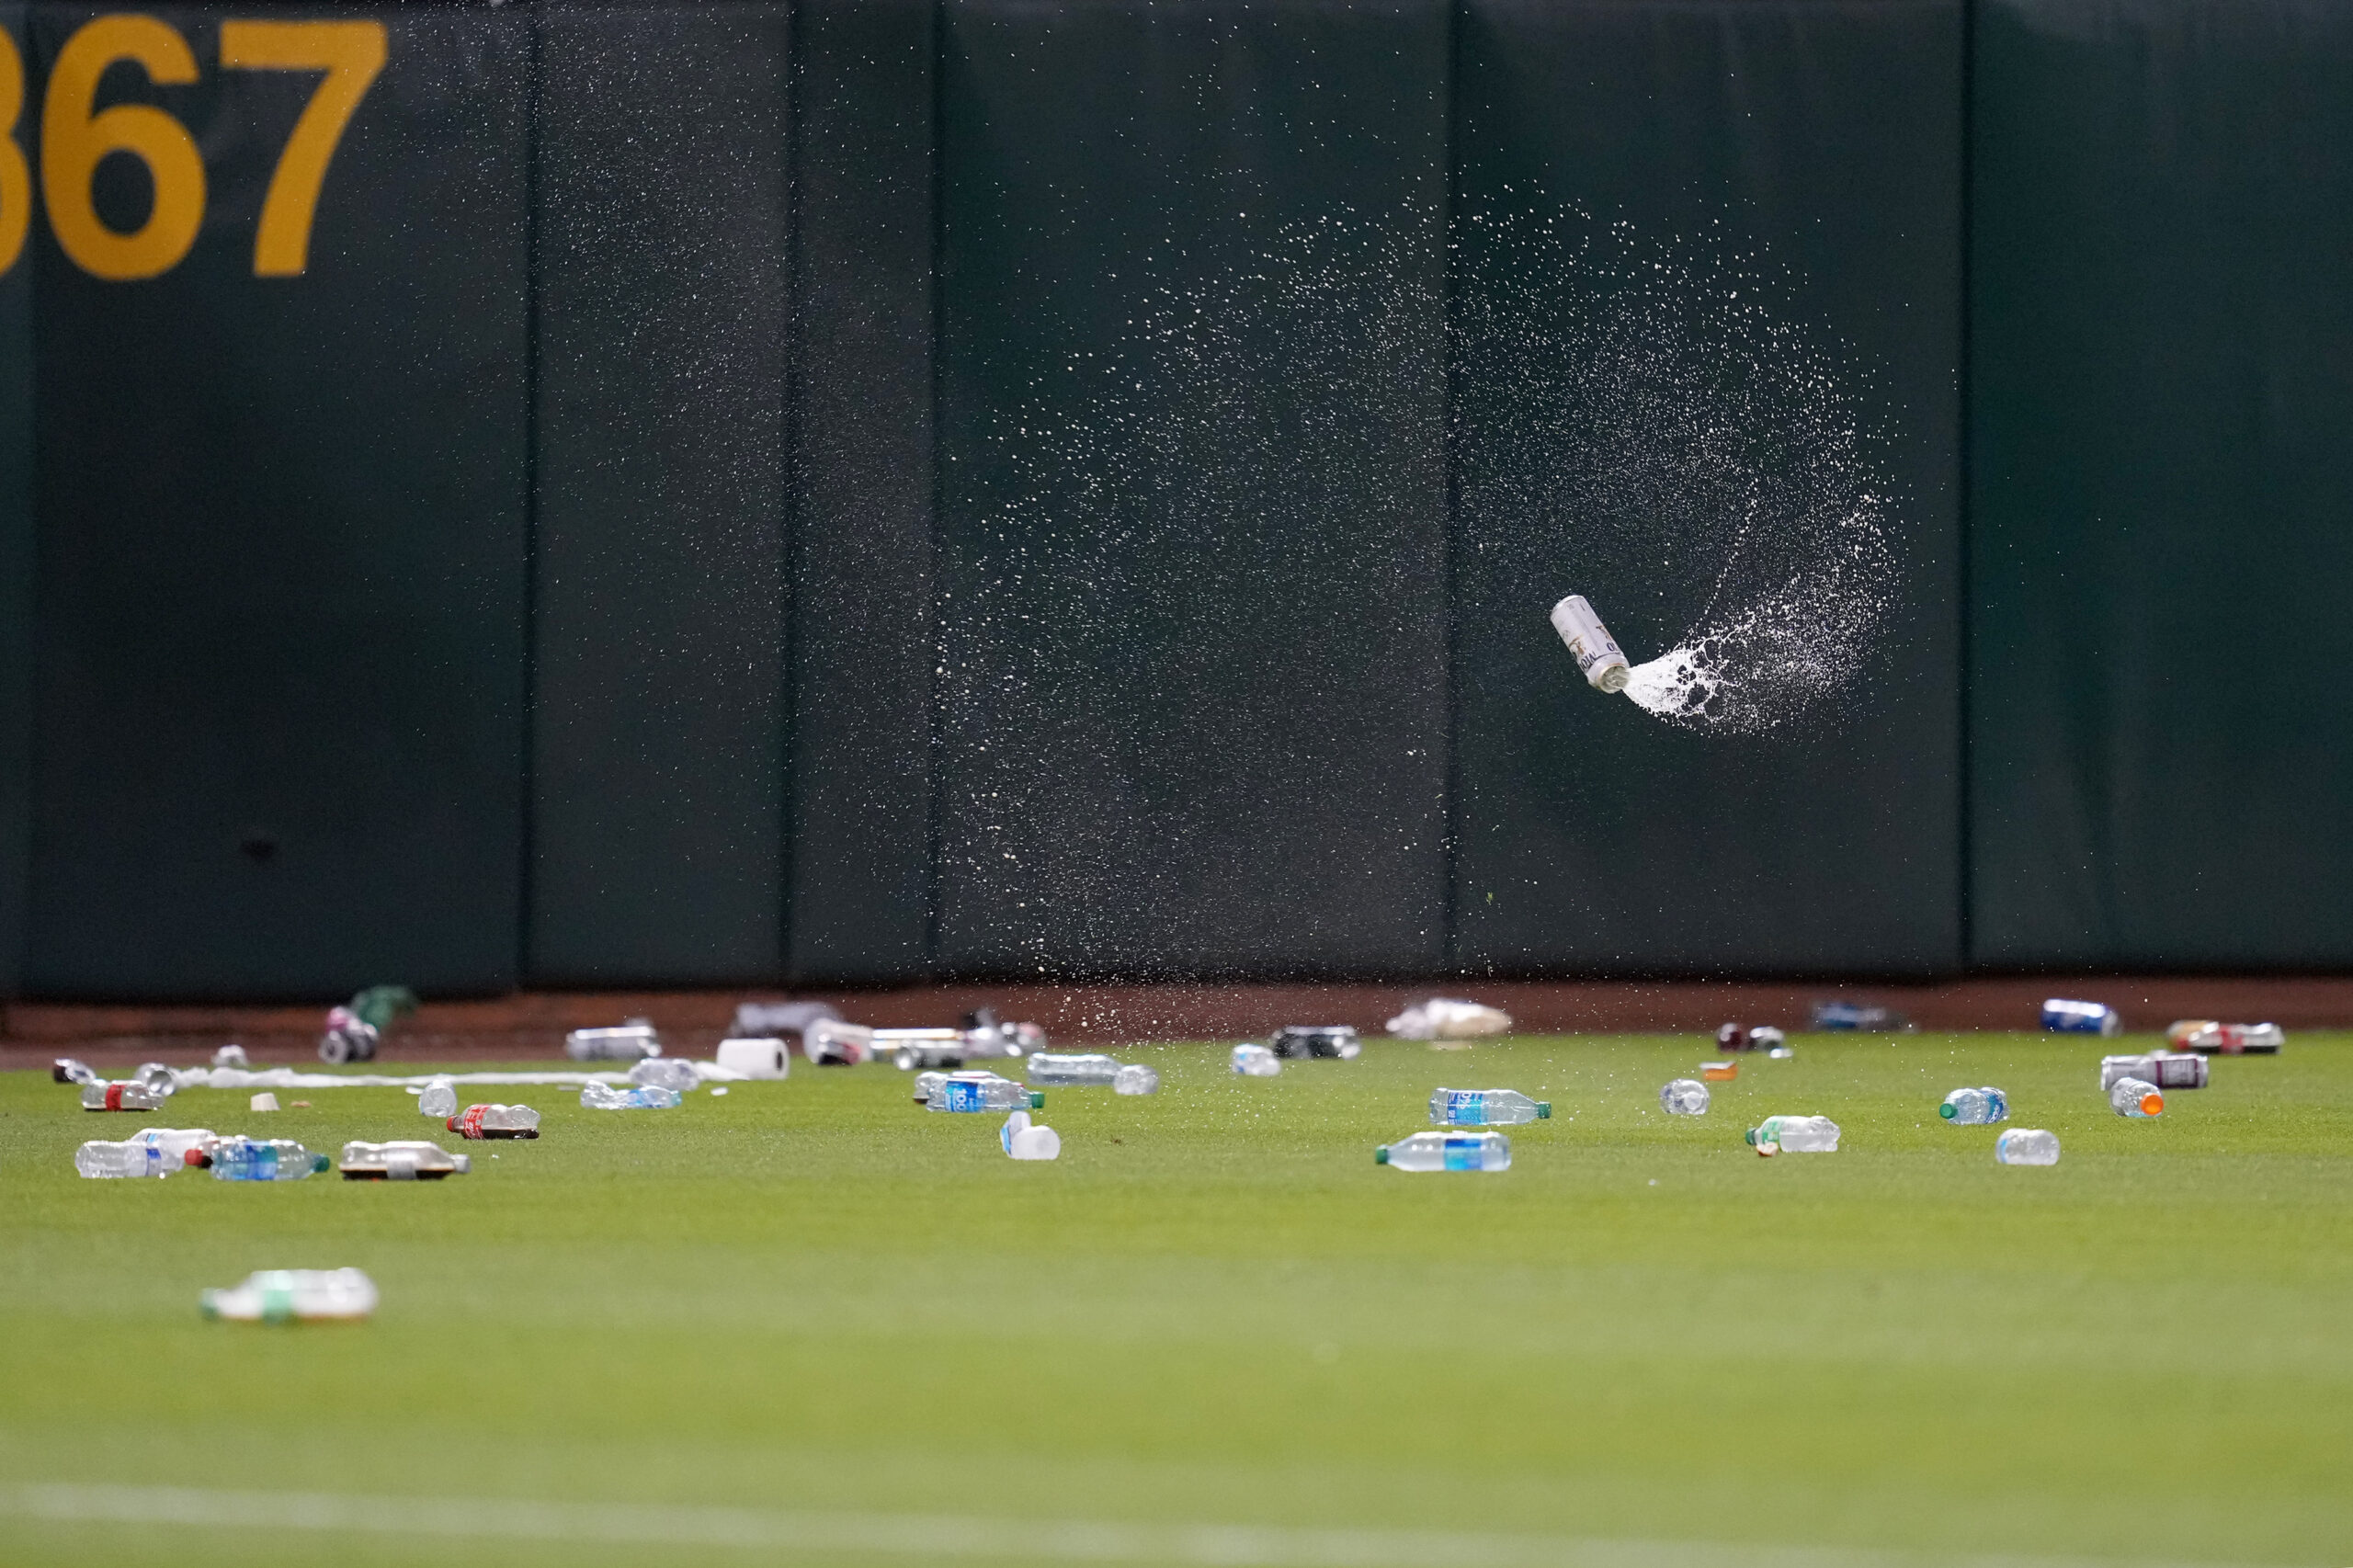 OAKLAND, CALIFORNIA - JUNE 13: Oakland Athletics fans throw garbage onto the field after a reverse boycott game at RingCentral Coliseum on June 13, 2023 in Oakland, California. (Photo by Brandon Vallance/Getty Images)